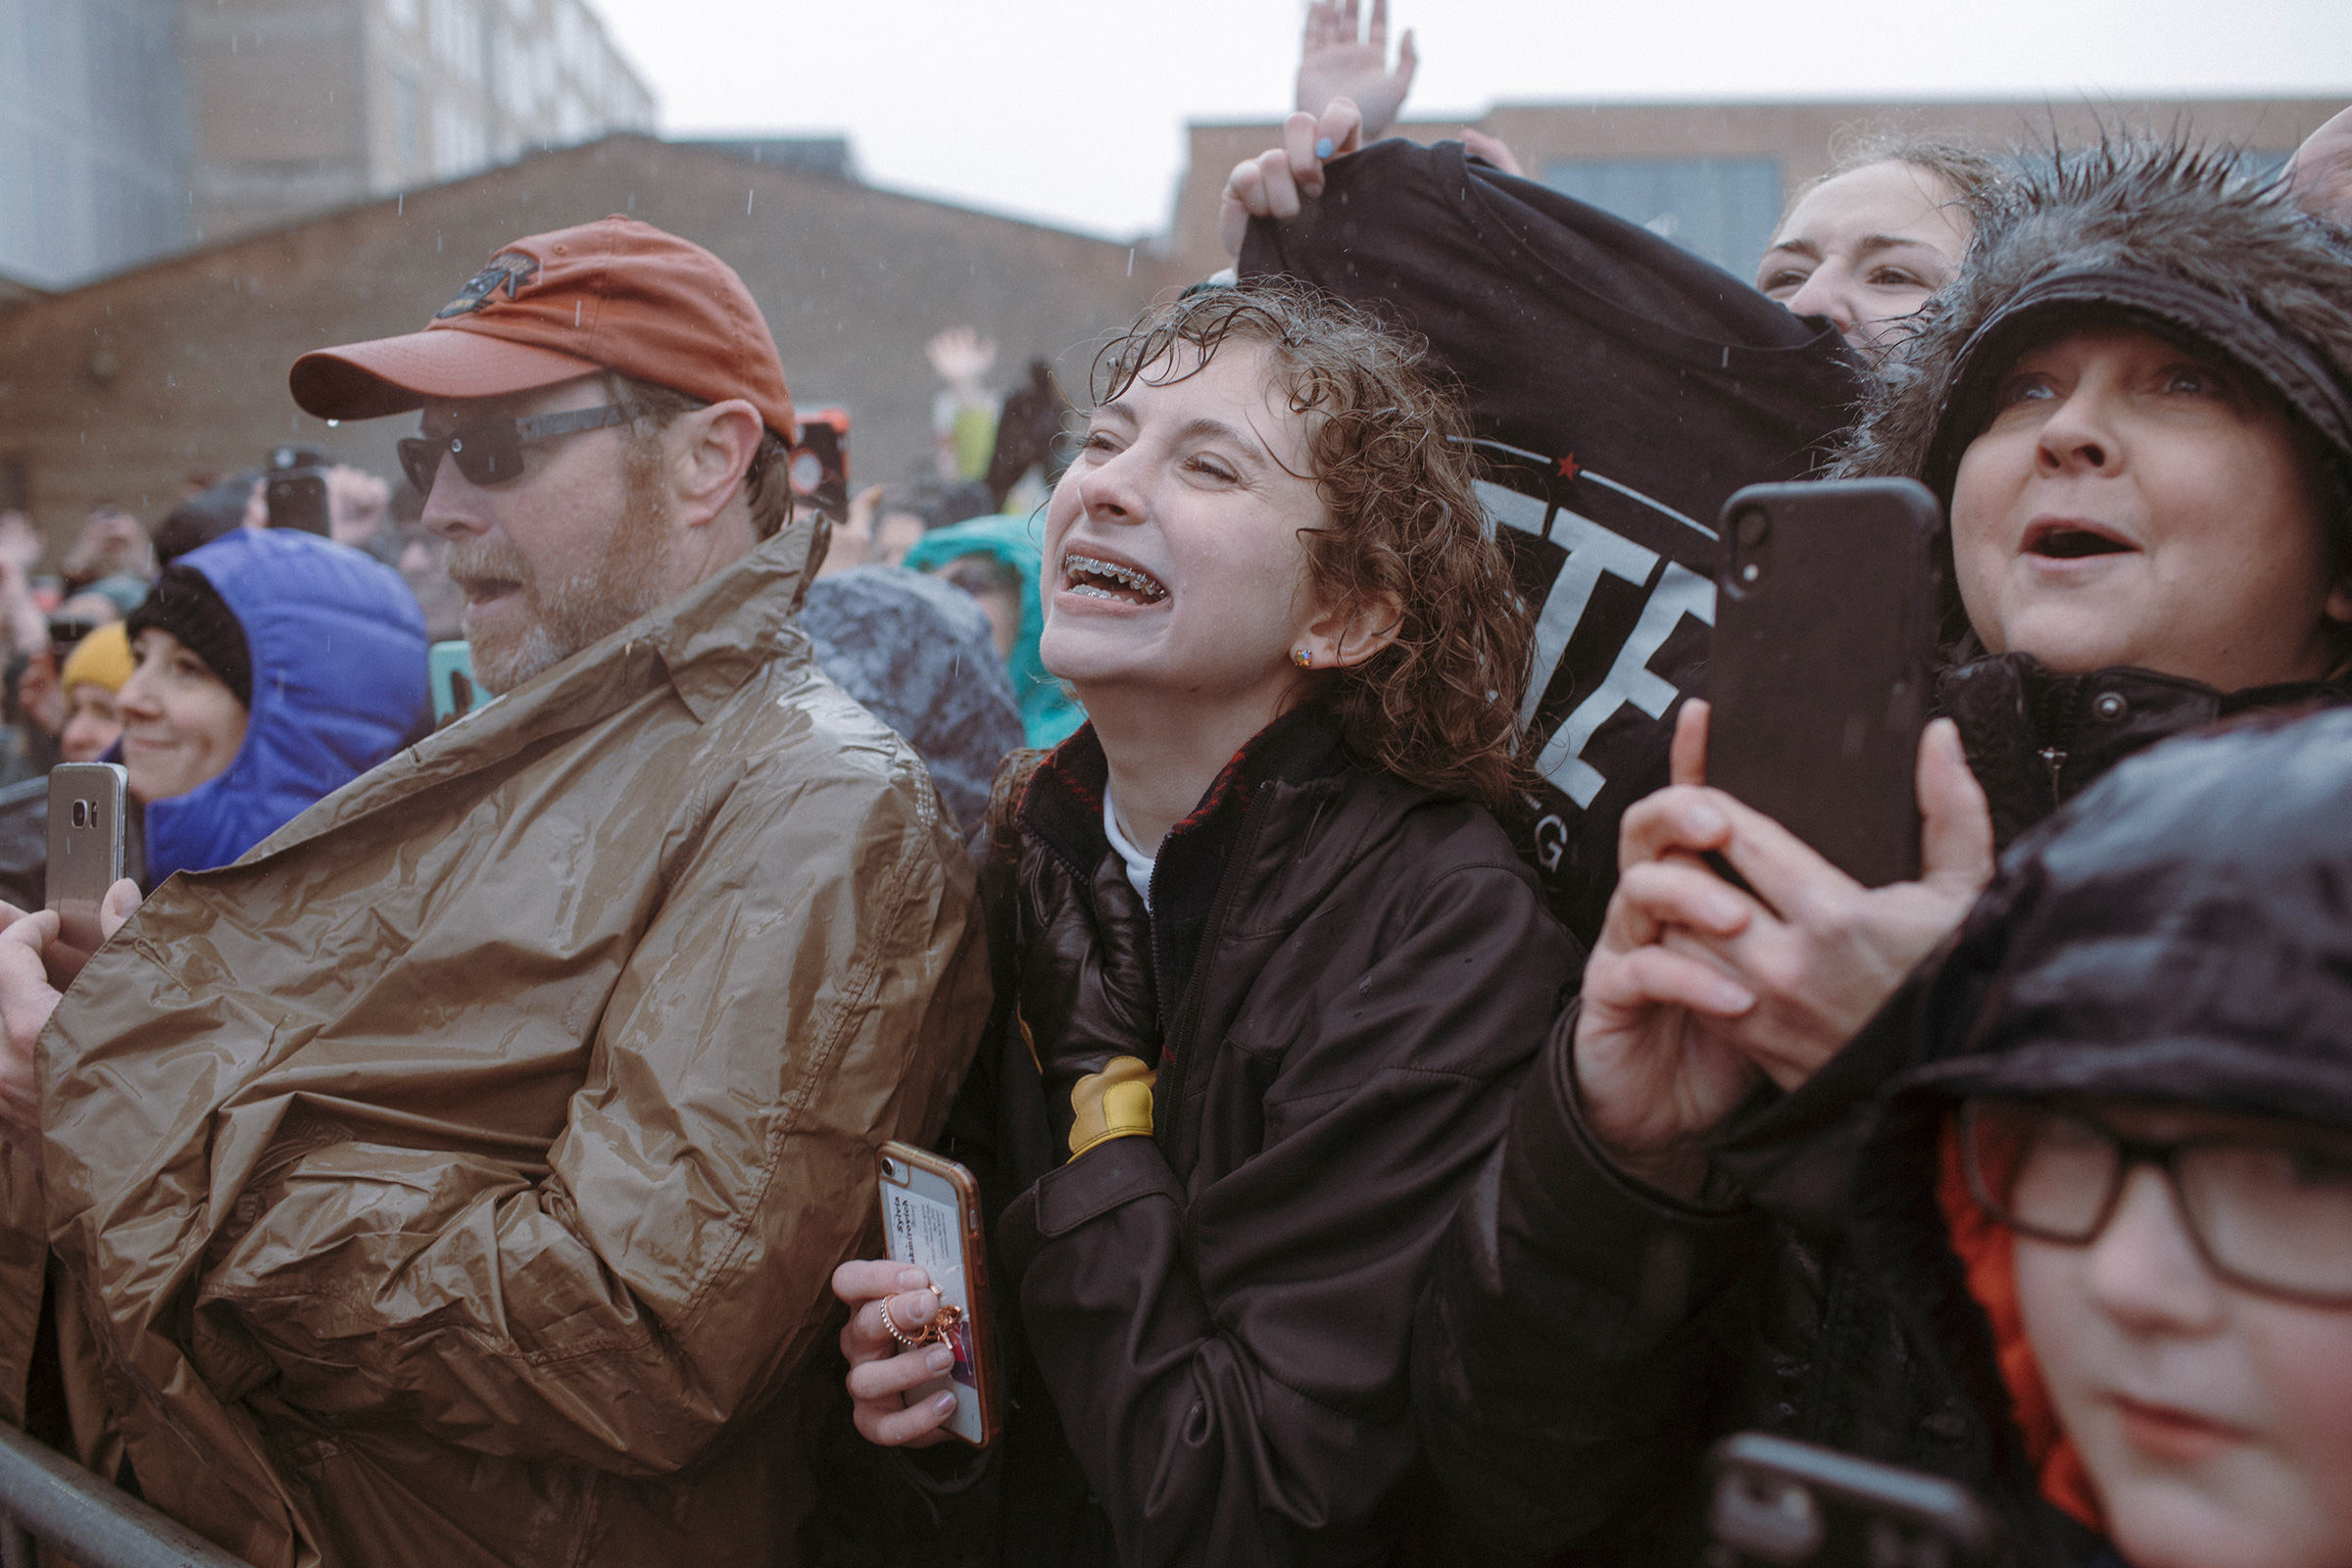 Supporters wait in the rain on April 14 for Pete Buttigieg’s presidential campaign announcement in South Bend. May 13 issue. (Elliot Ross for TIME)